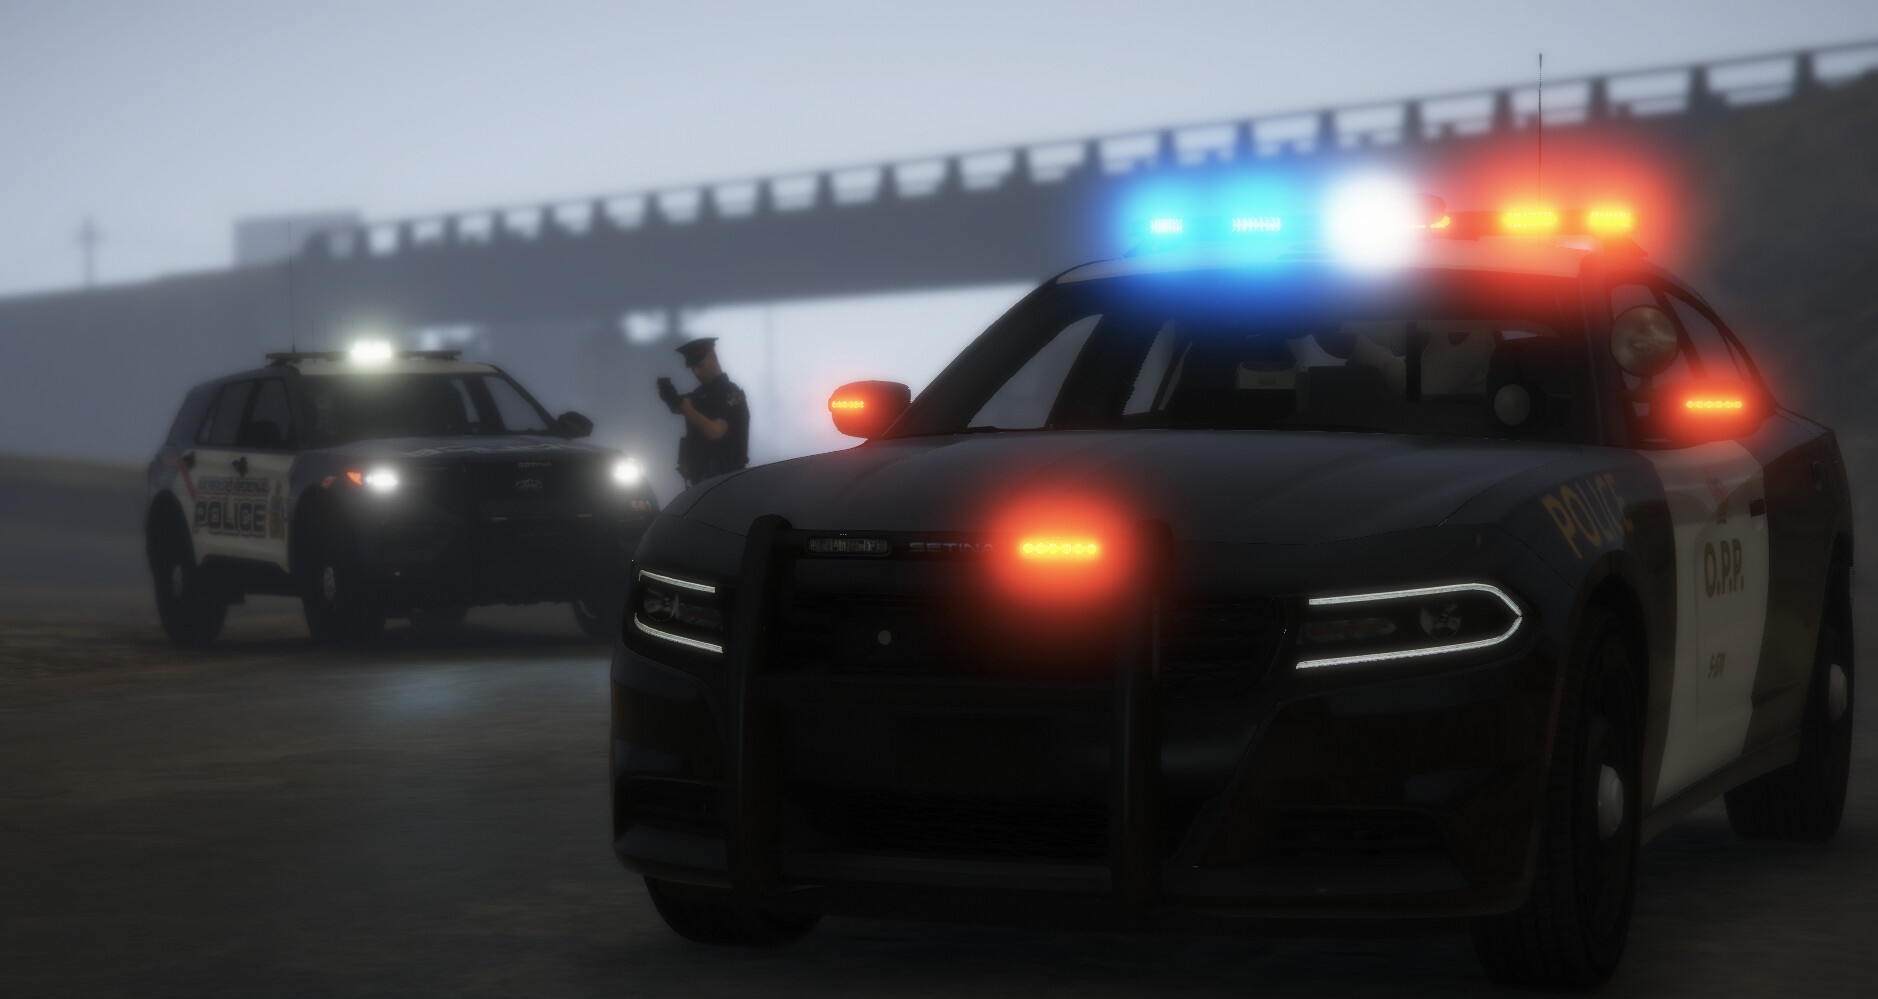 Greater Ontario Roleplay Serious Professional Custom Vehicles Custom Scripts Custom Eup Ontario Provincial Police Fire Ems Civilian Operations Recruiting Server Bazaar Cfx Re Community - roblox police roleplay